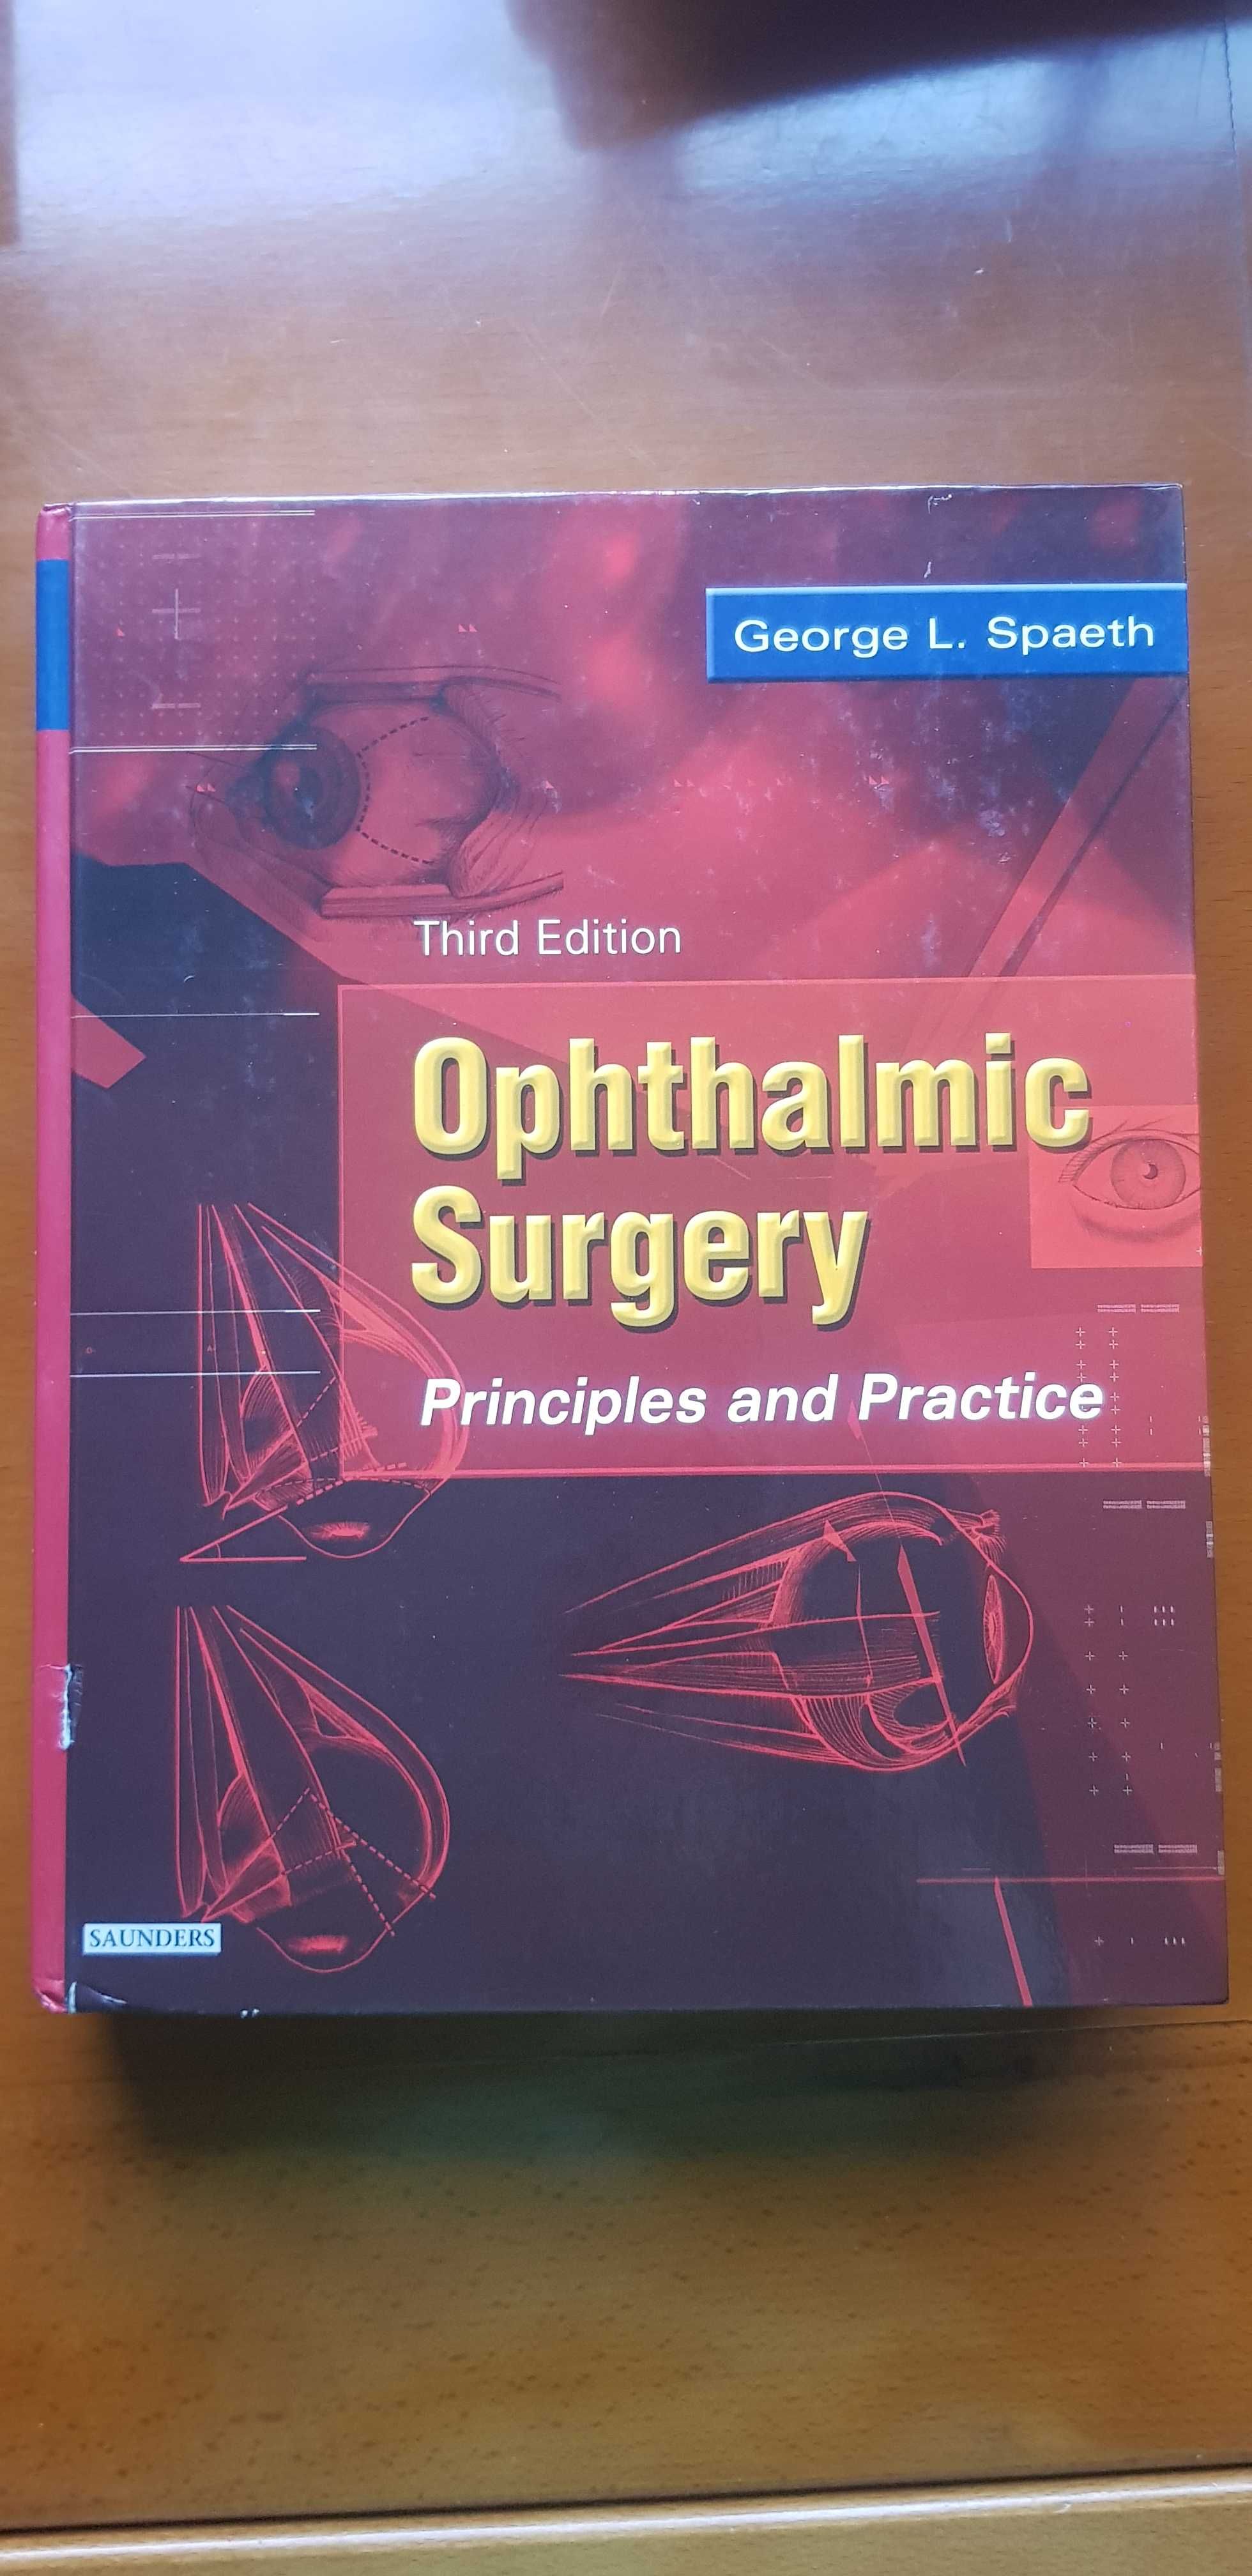 Ophthalmic surgery principles and practice george l. Spaeth